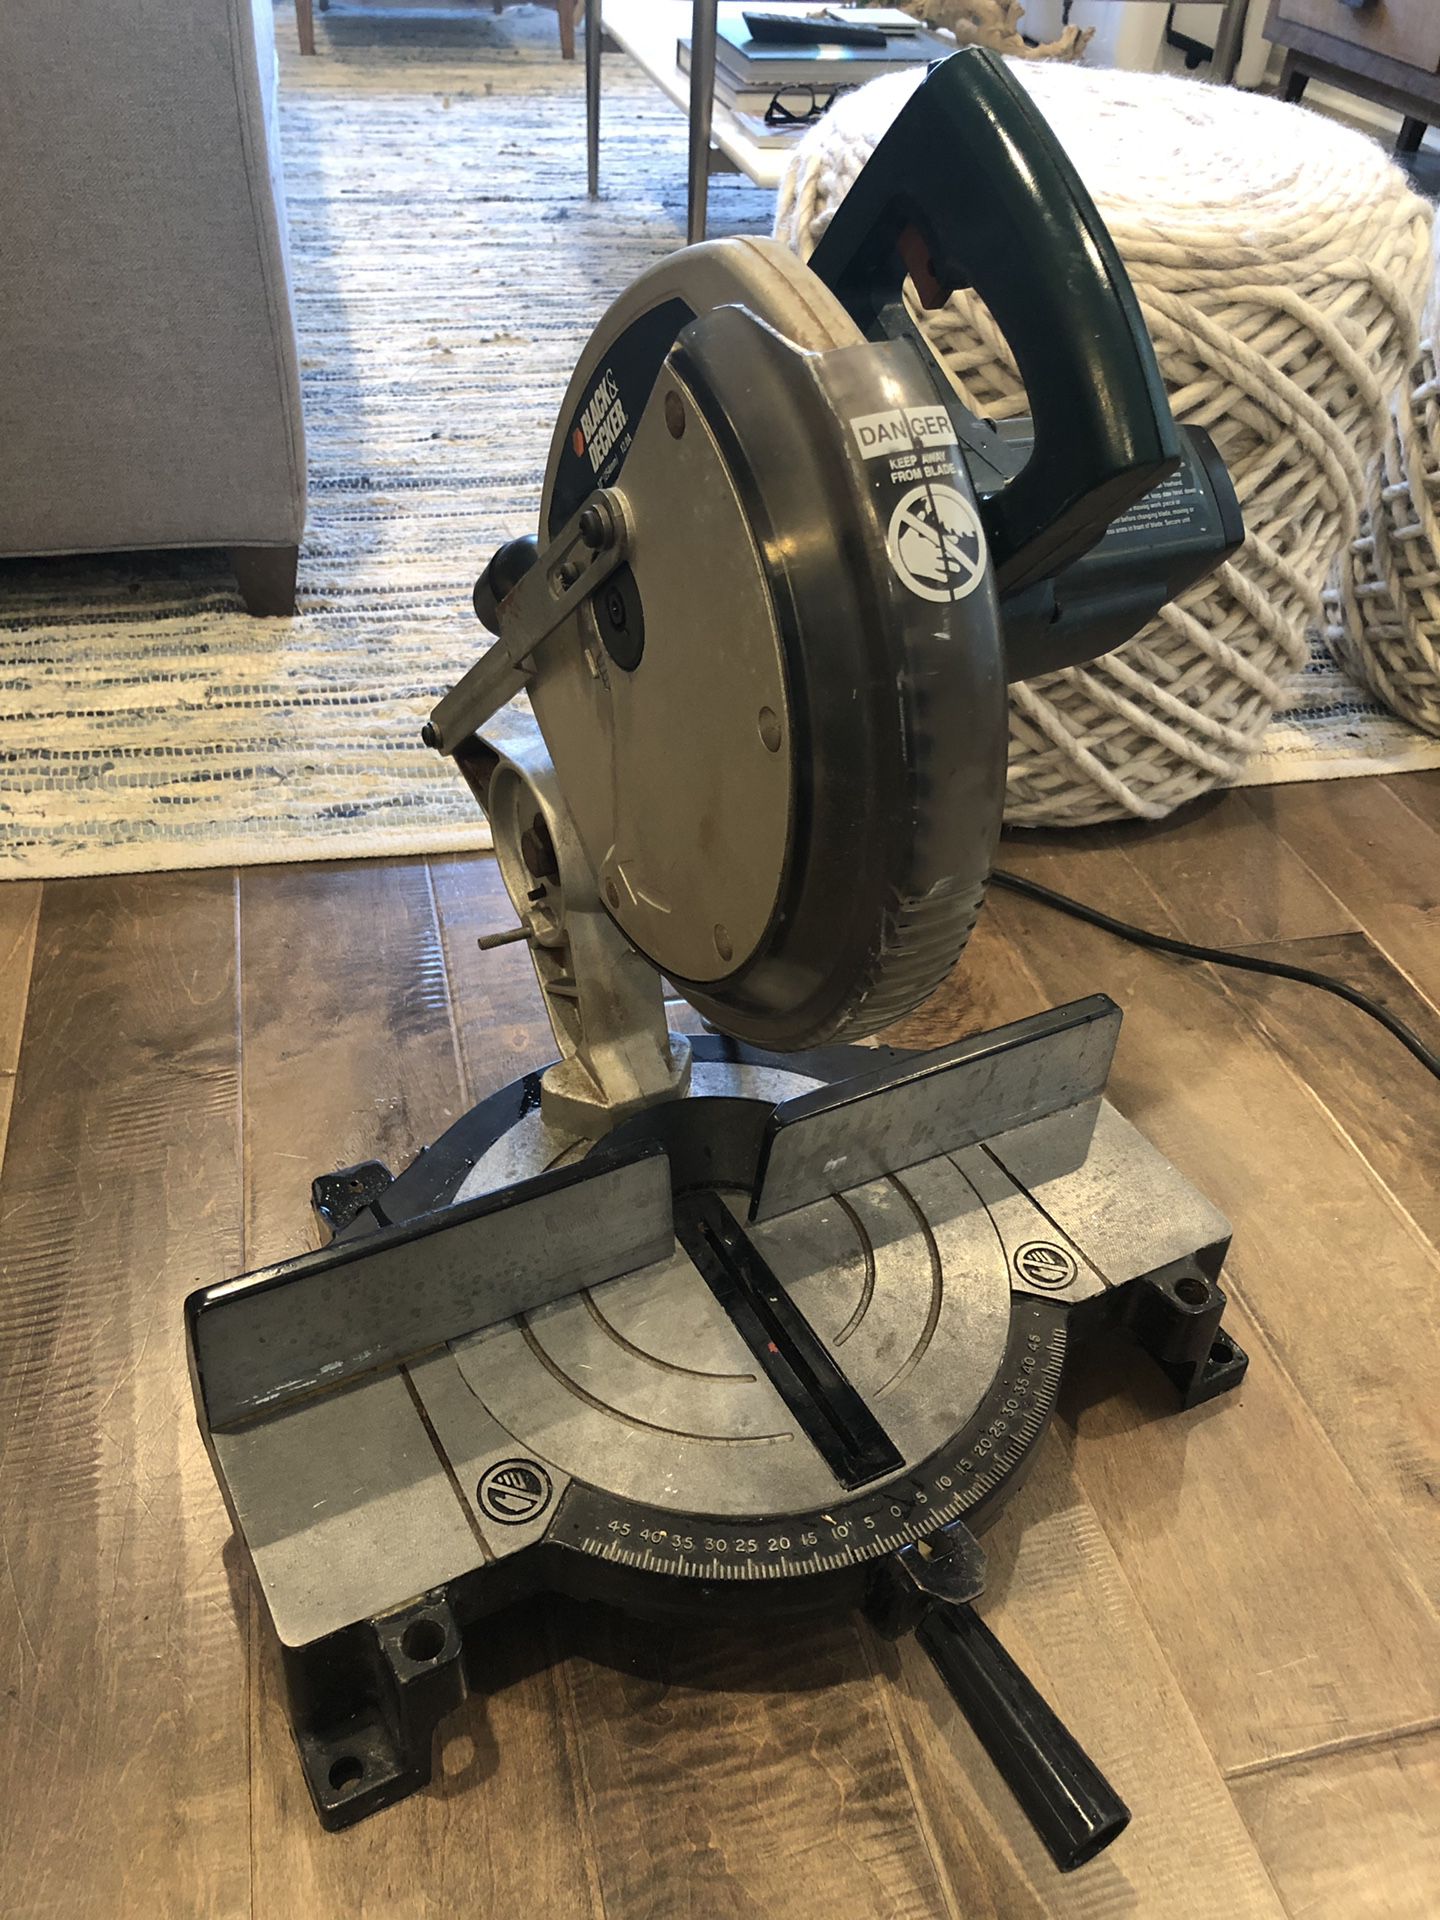 Black & Decker miter saw and table $75 for Sale in Woodstock, GA - OfferUp